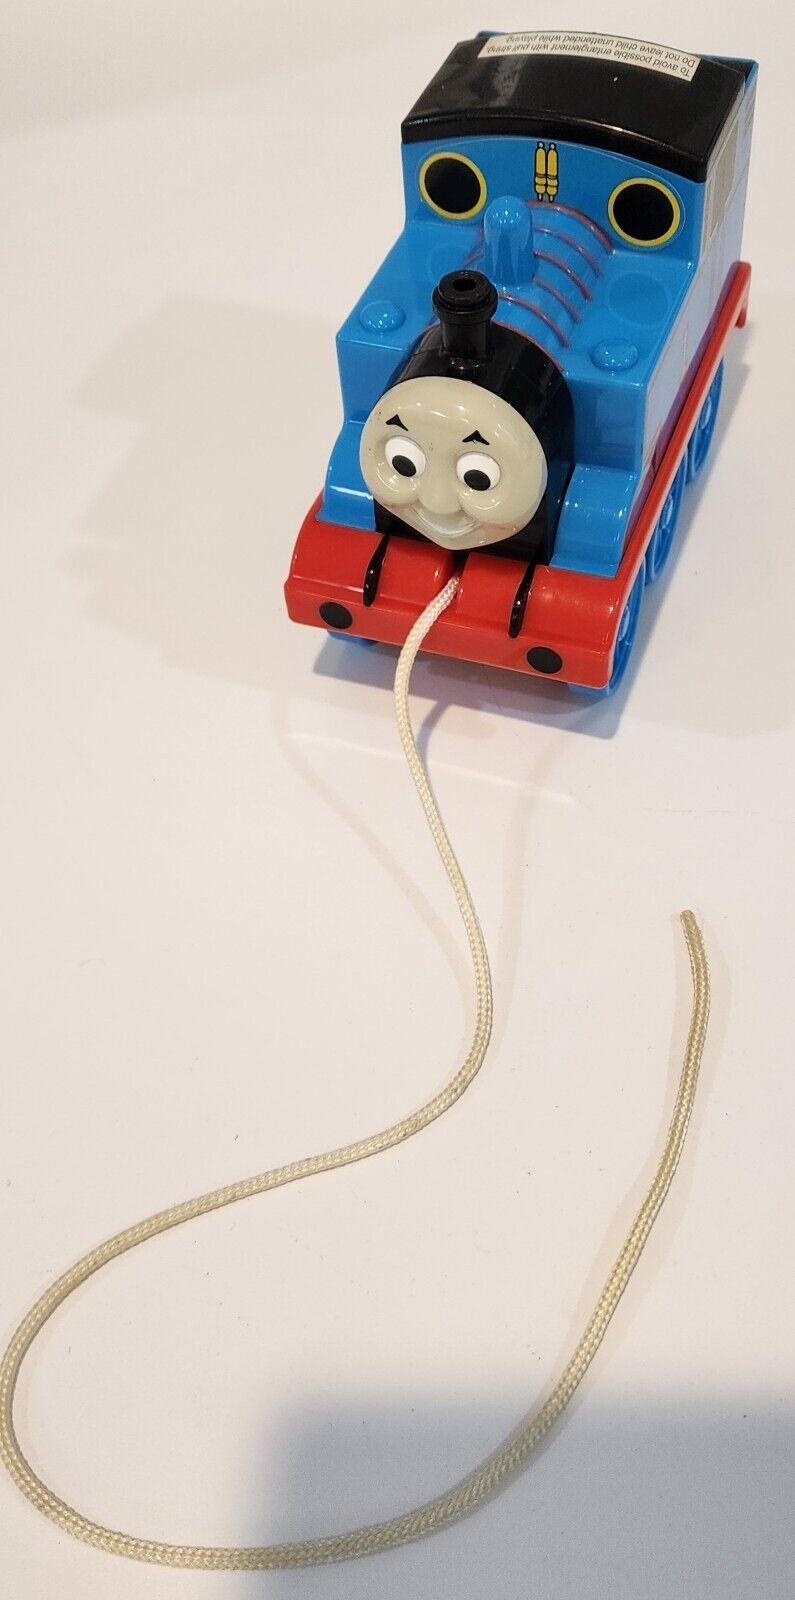 2006 Tomy Battery Operated Toy Thomas the Engine pull toy RARE Not Tested